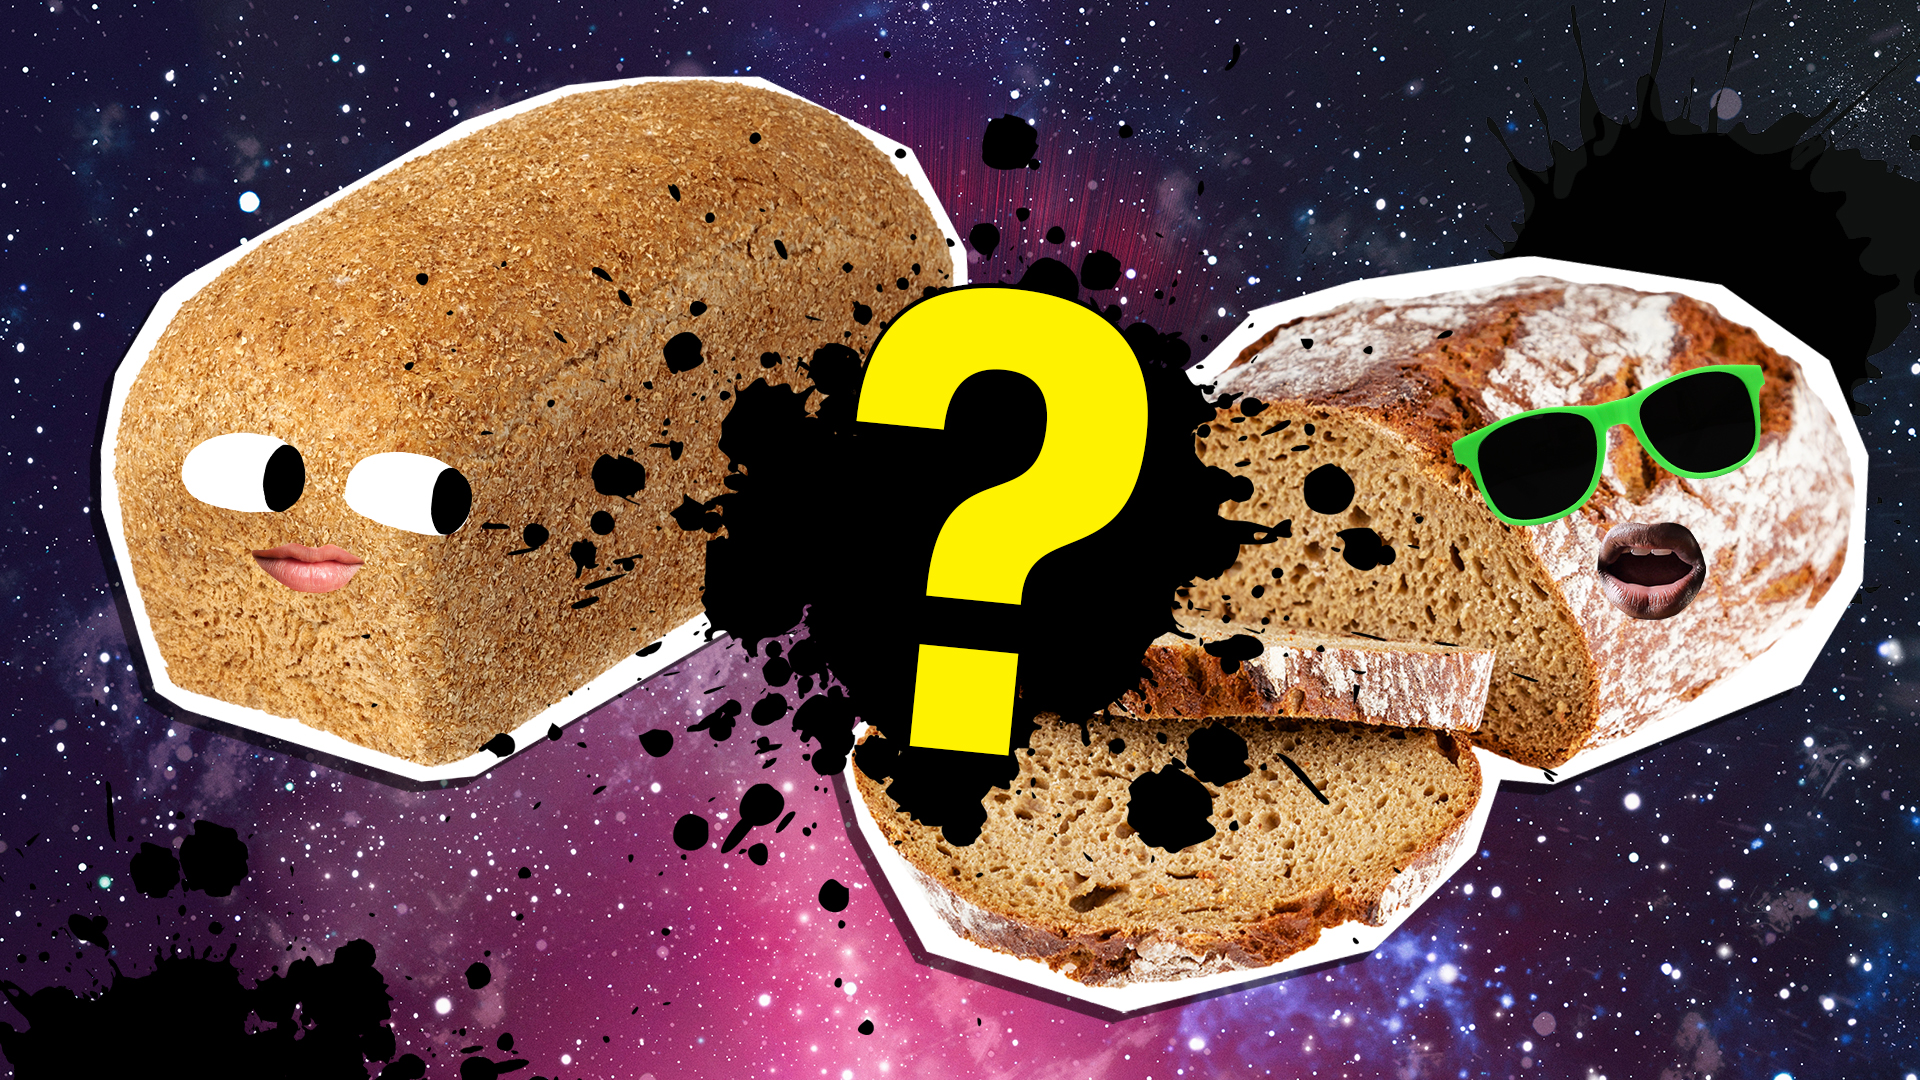 Take This Test to Find Out What Kind of Bread You Are